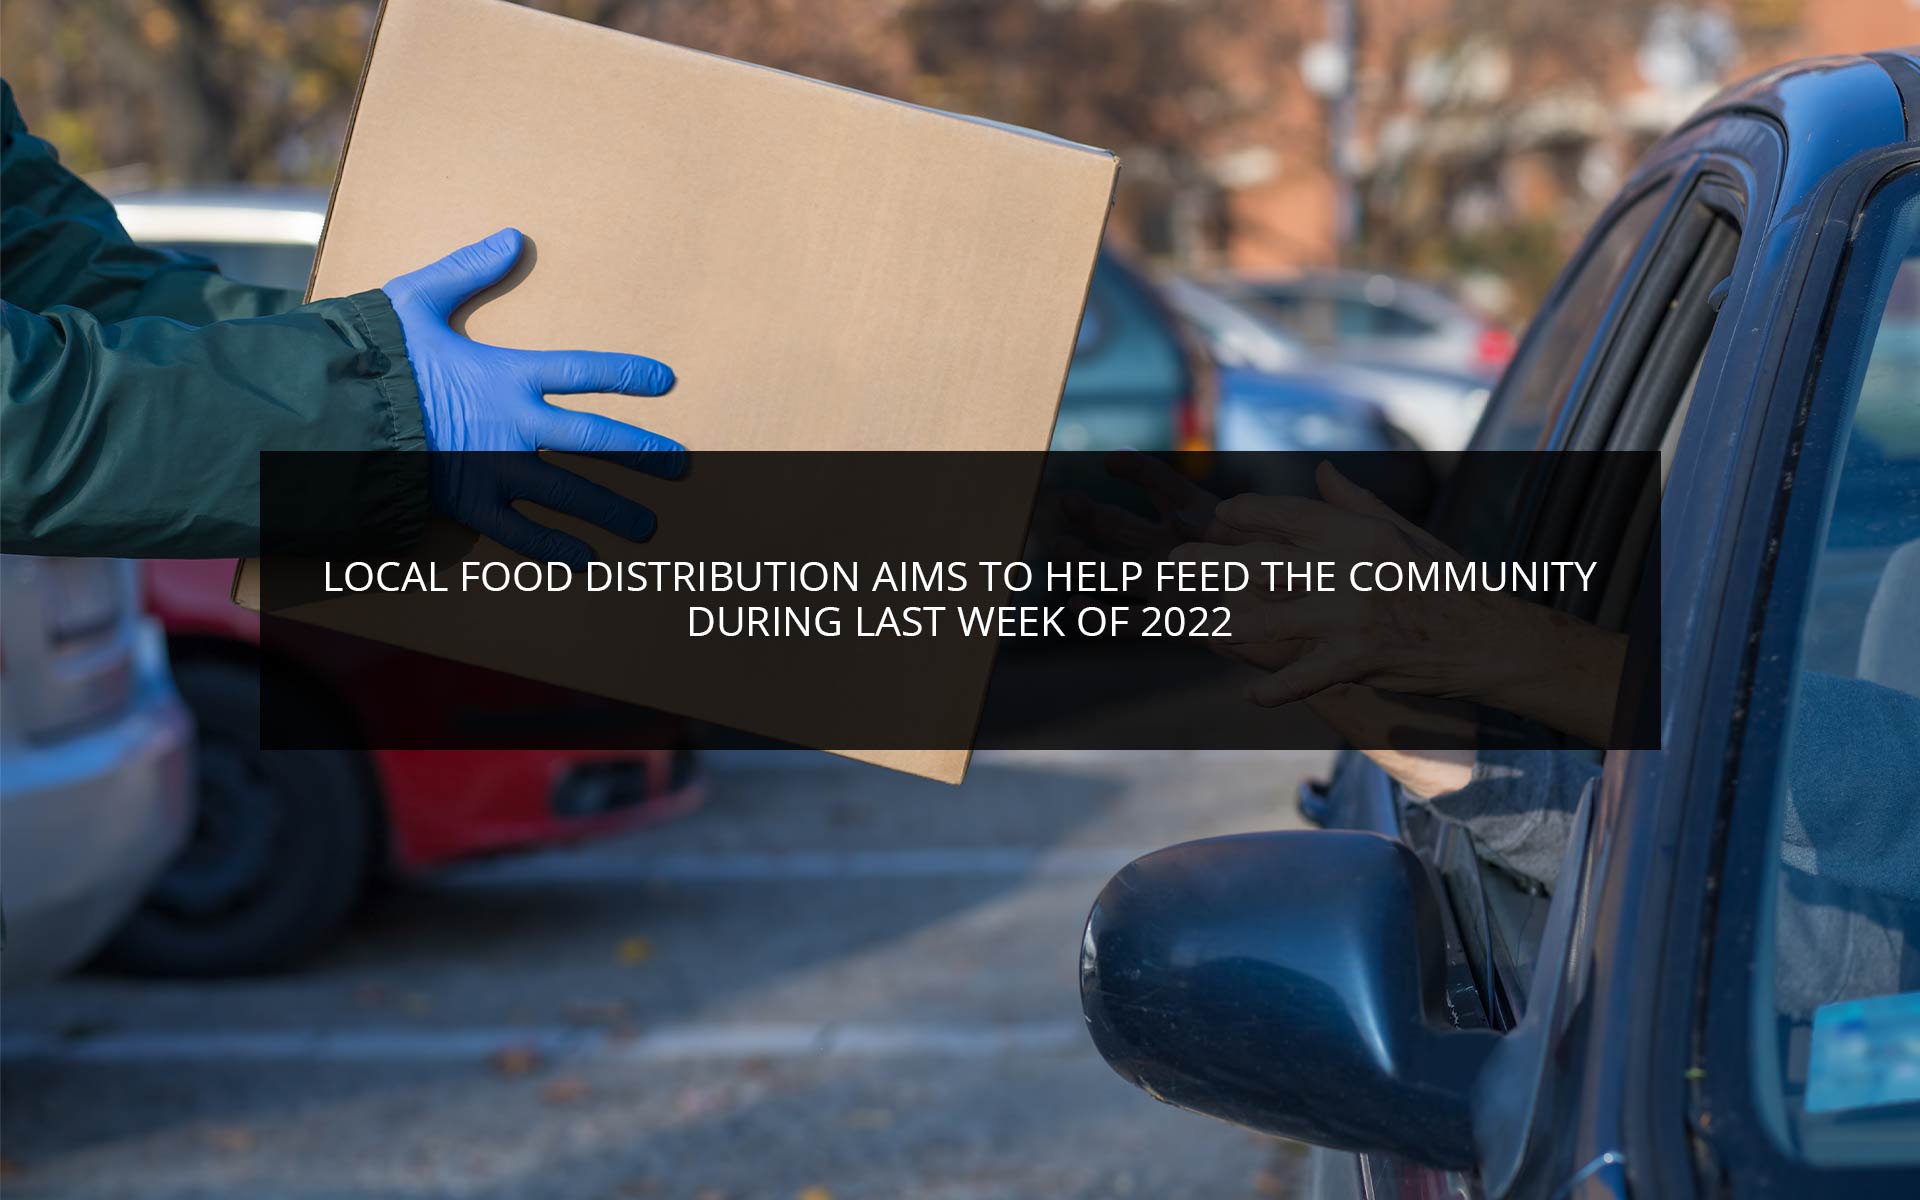 Local Food Distribution Aims to Help Feed the Community During Last Week of 2022